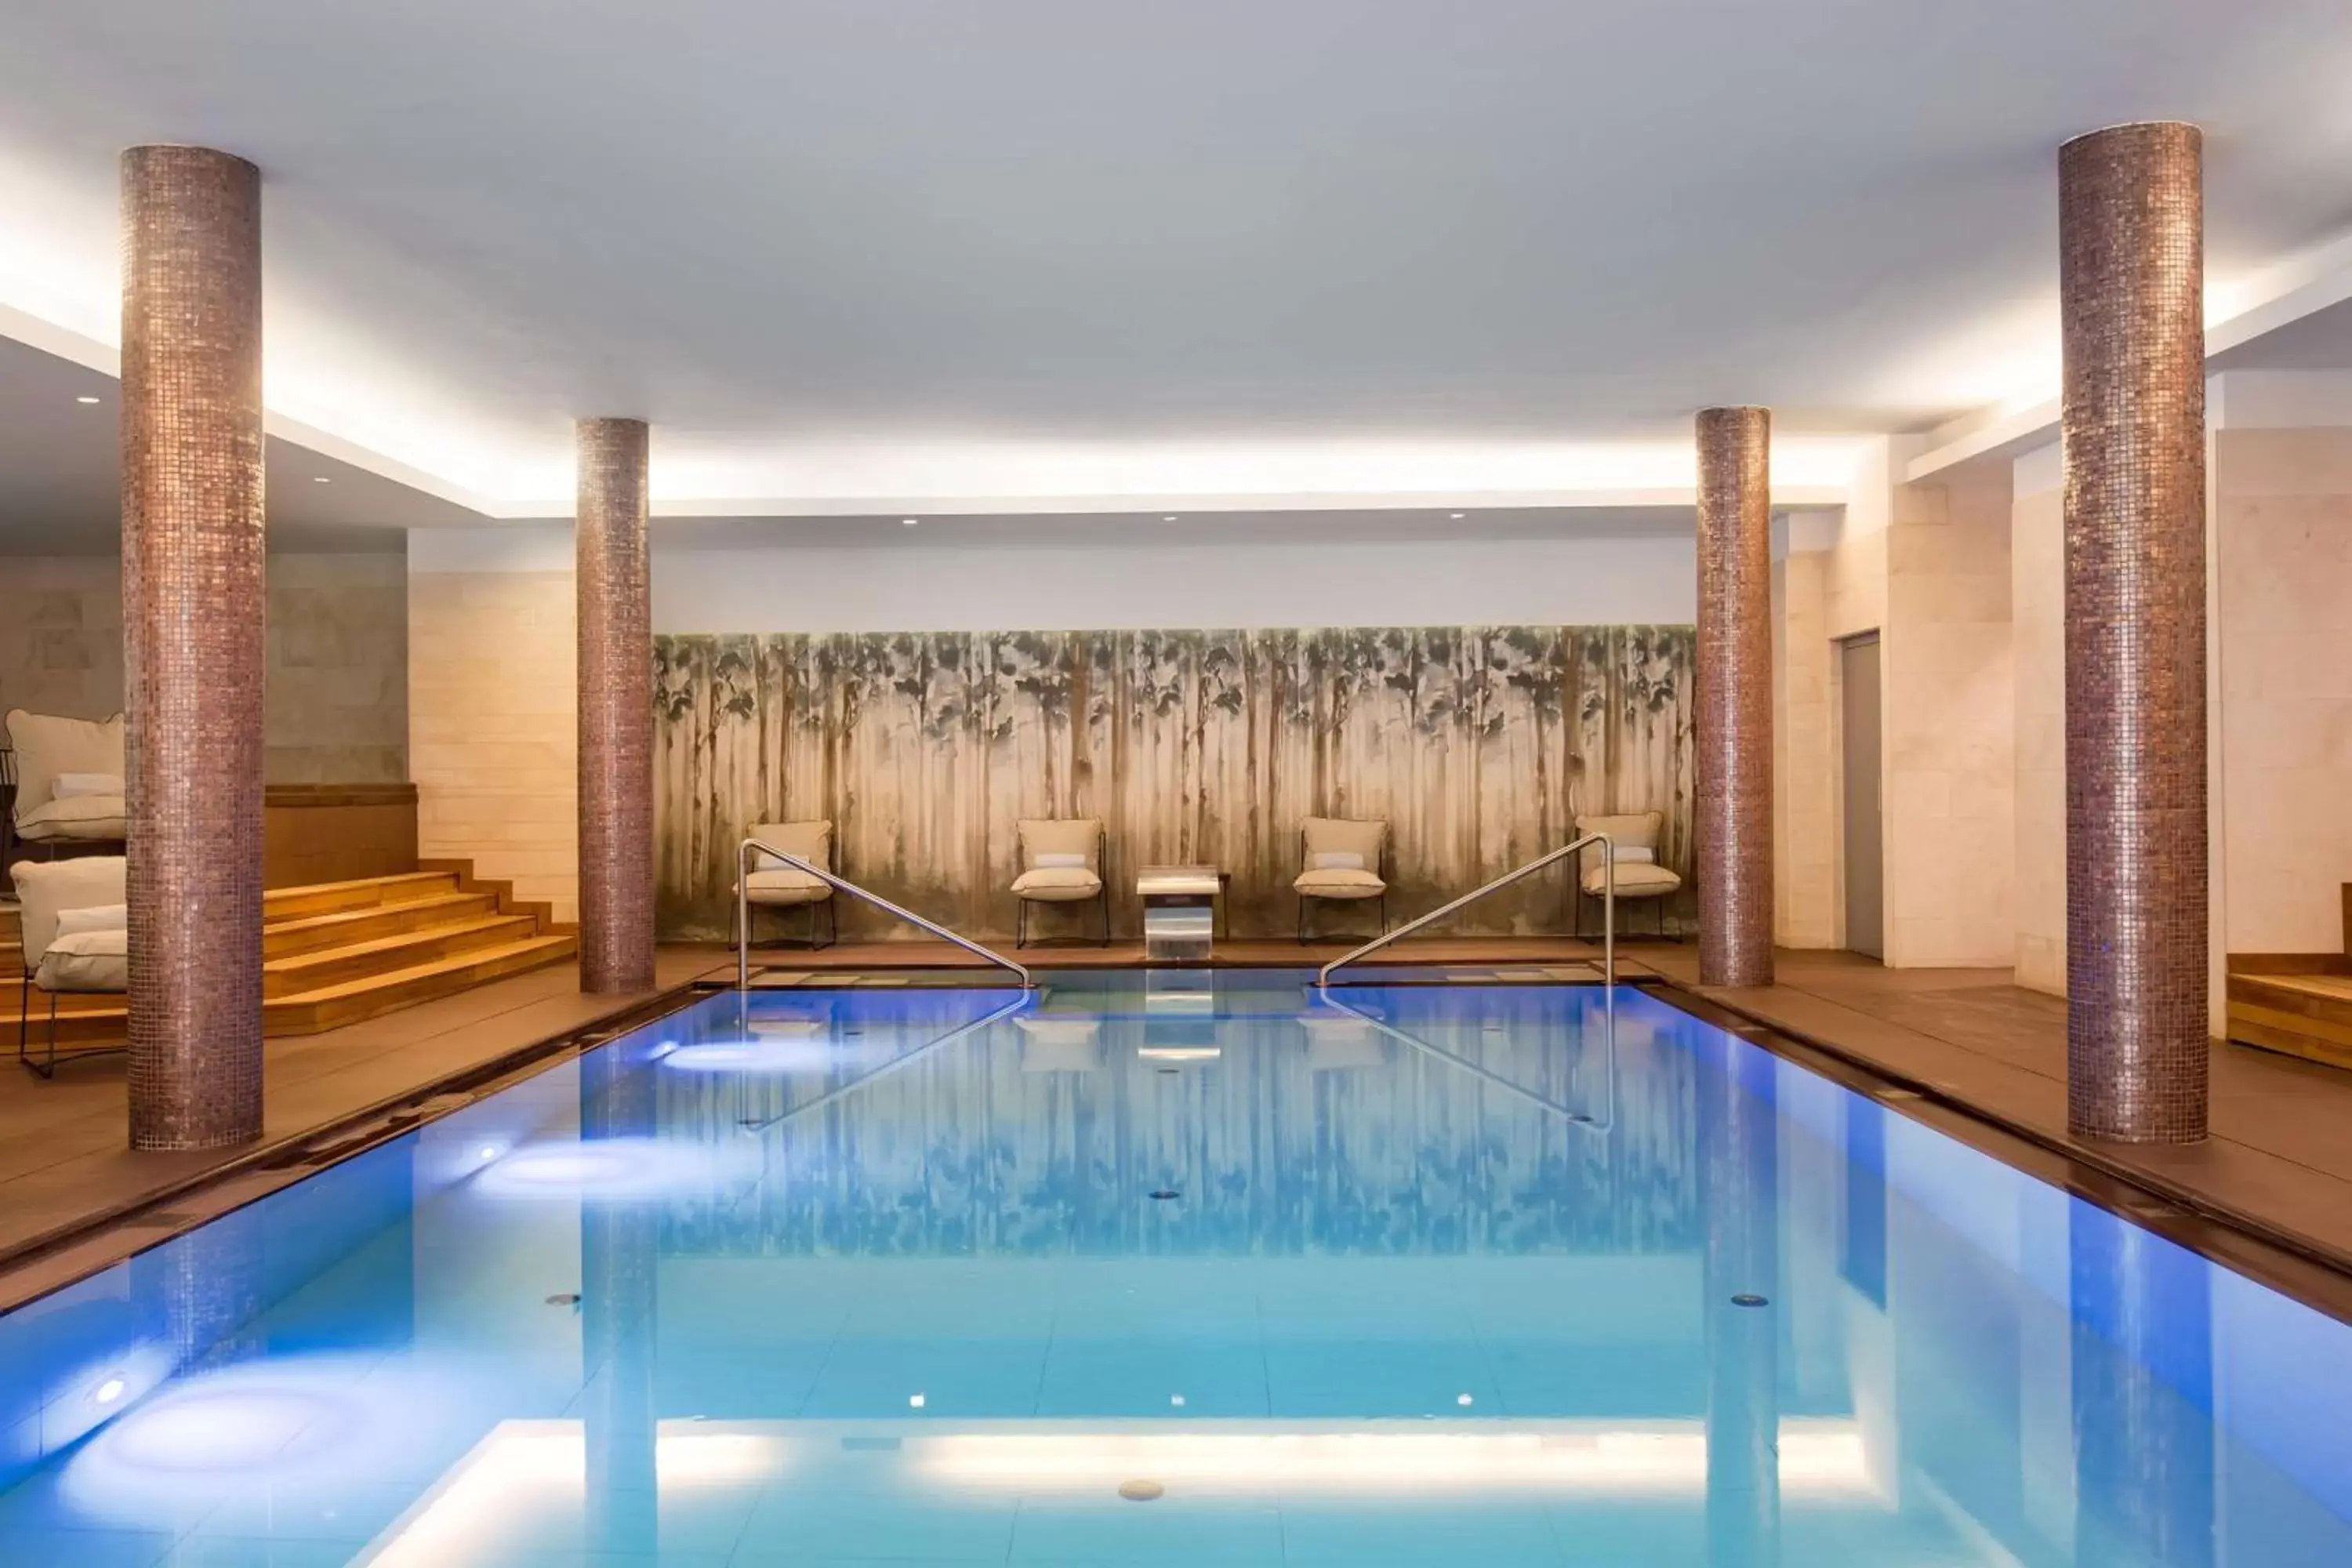 Activities, Swimming Pool in Grand Hotel Savoia Cortina d'Ampezzo, A Radisson Collection Hotel